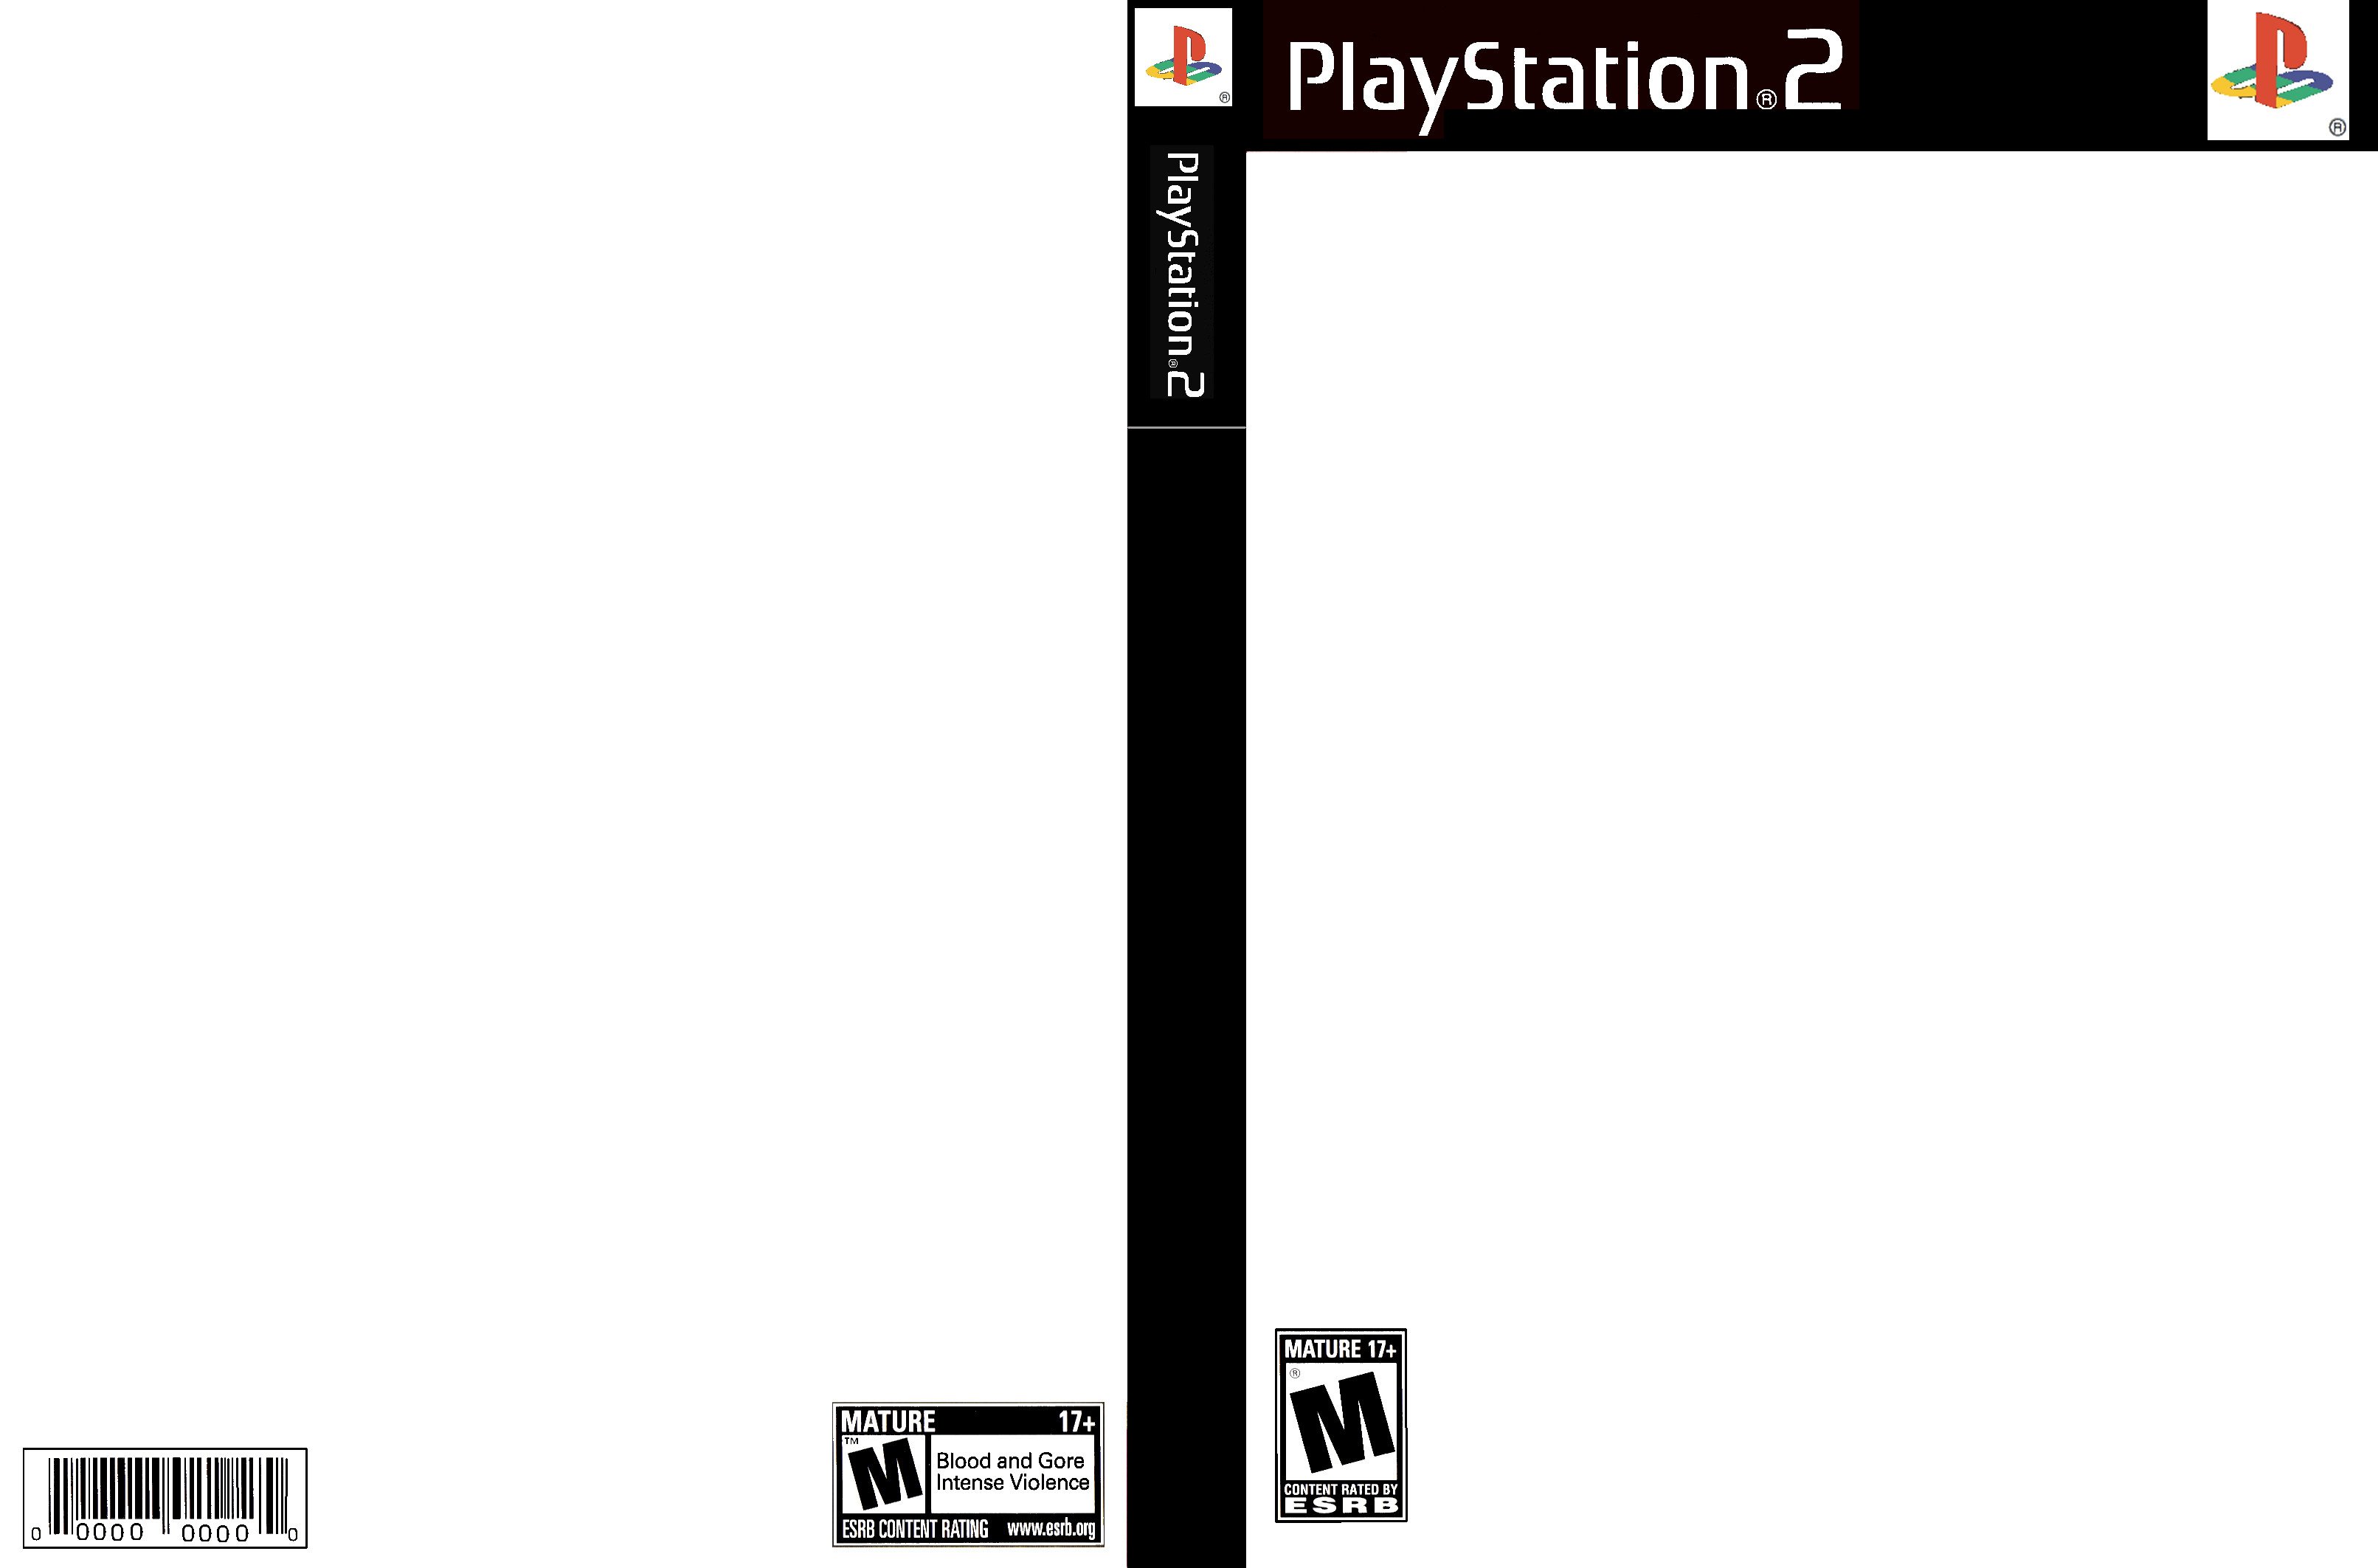 Ps2 Cover Template Ps2 Game Full Cover Template by Reddog F6 On Deviantart